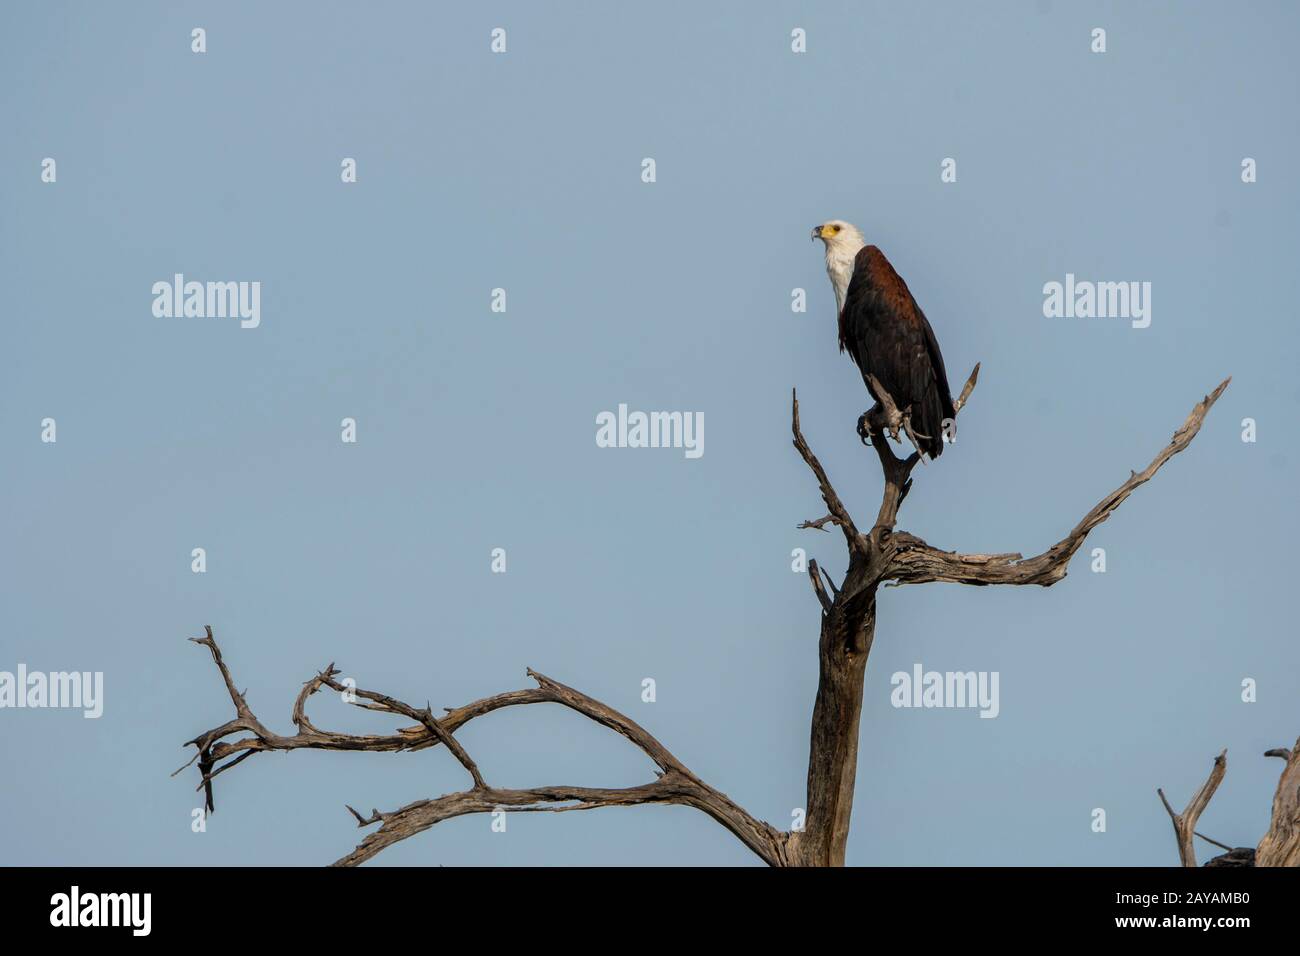 An African fish eagle (Haliaeetus vocifer) is perched in a dead tree in the Gomoti Plains area, a community run concession, on the edge of the Gomoti Stock Photo